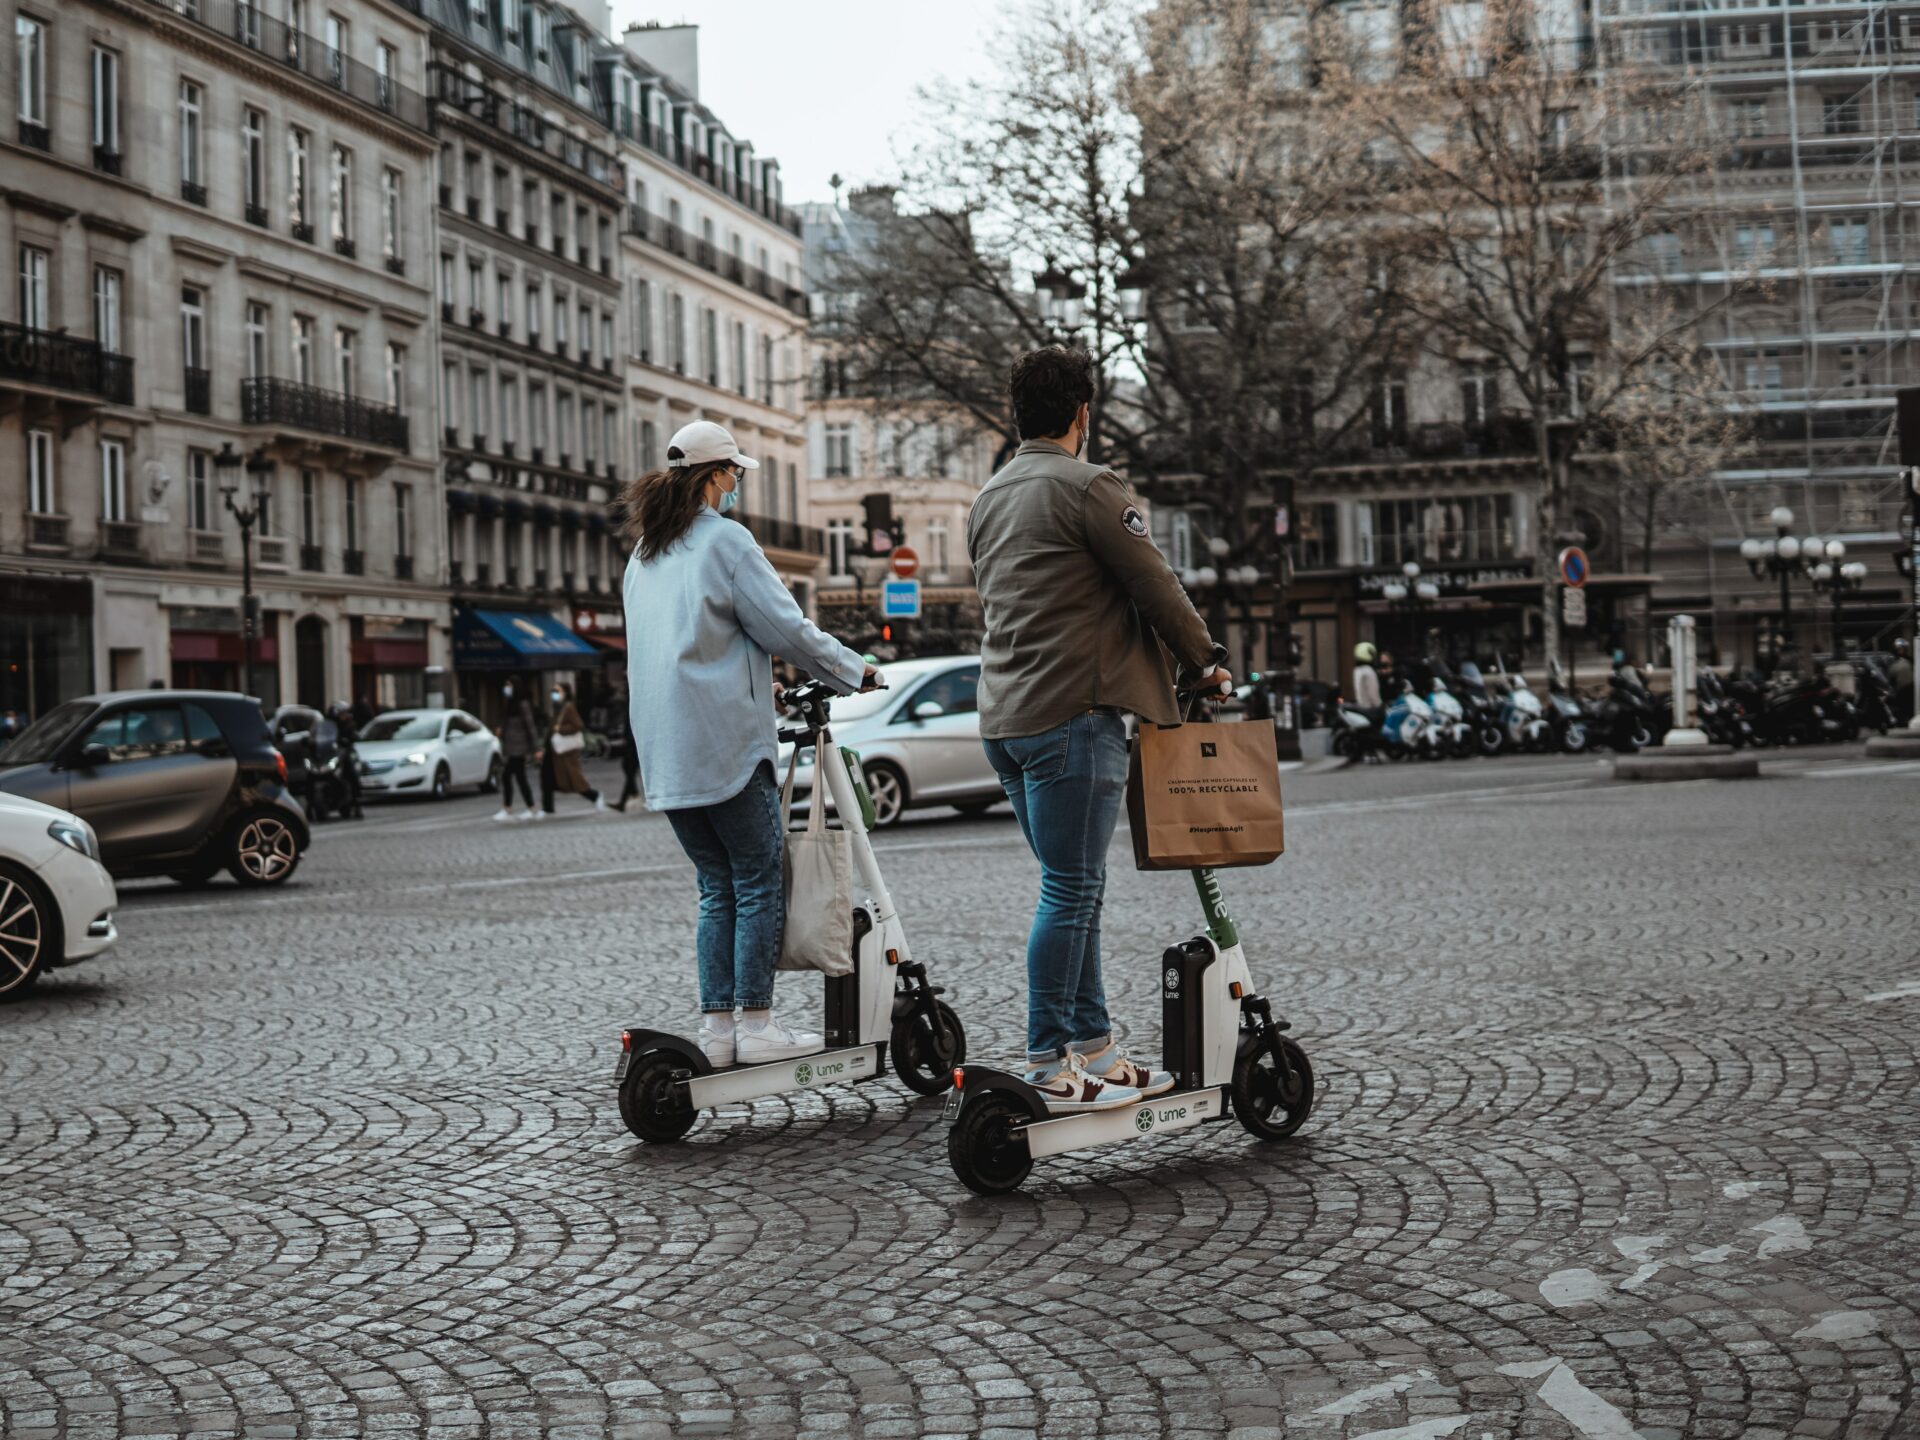 Woman and man on electric scooters. Photo by Vlad B on Unsplash.